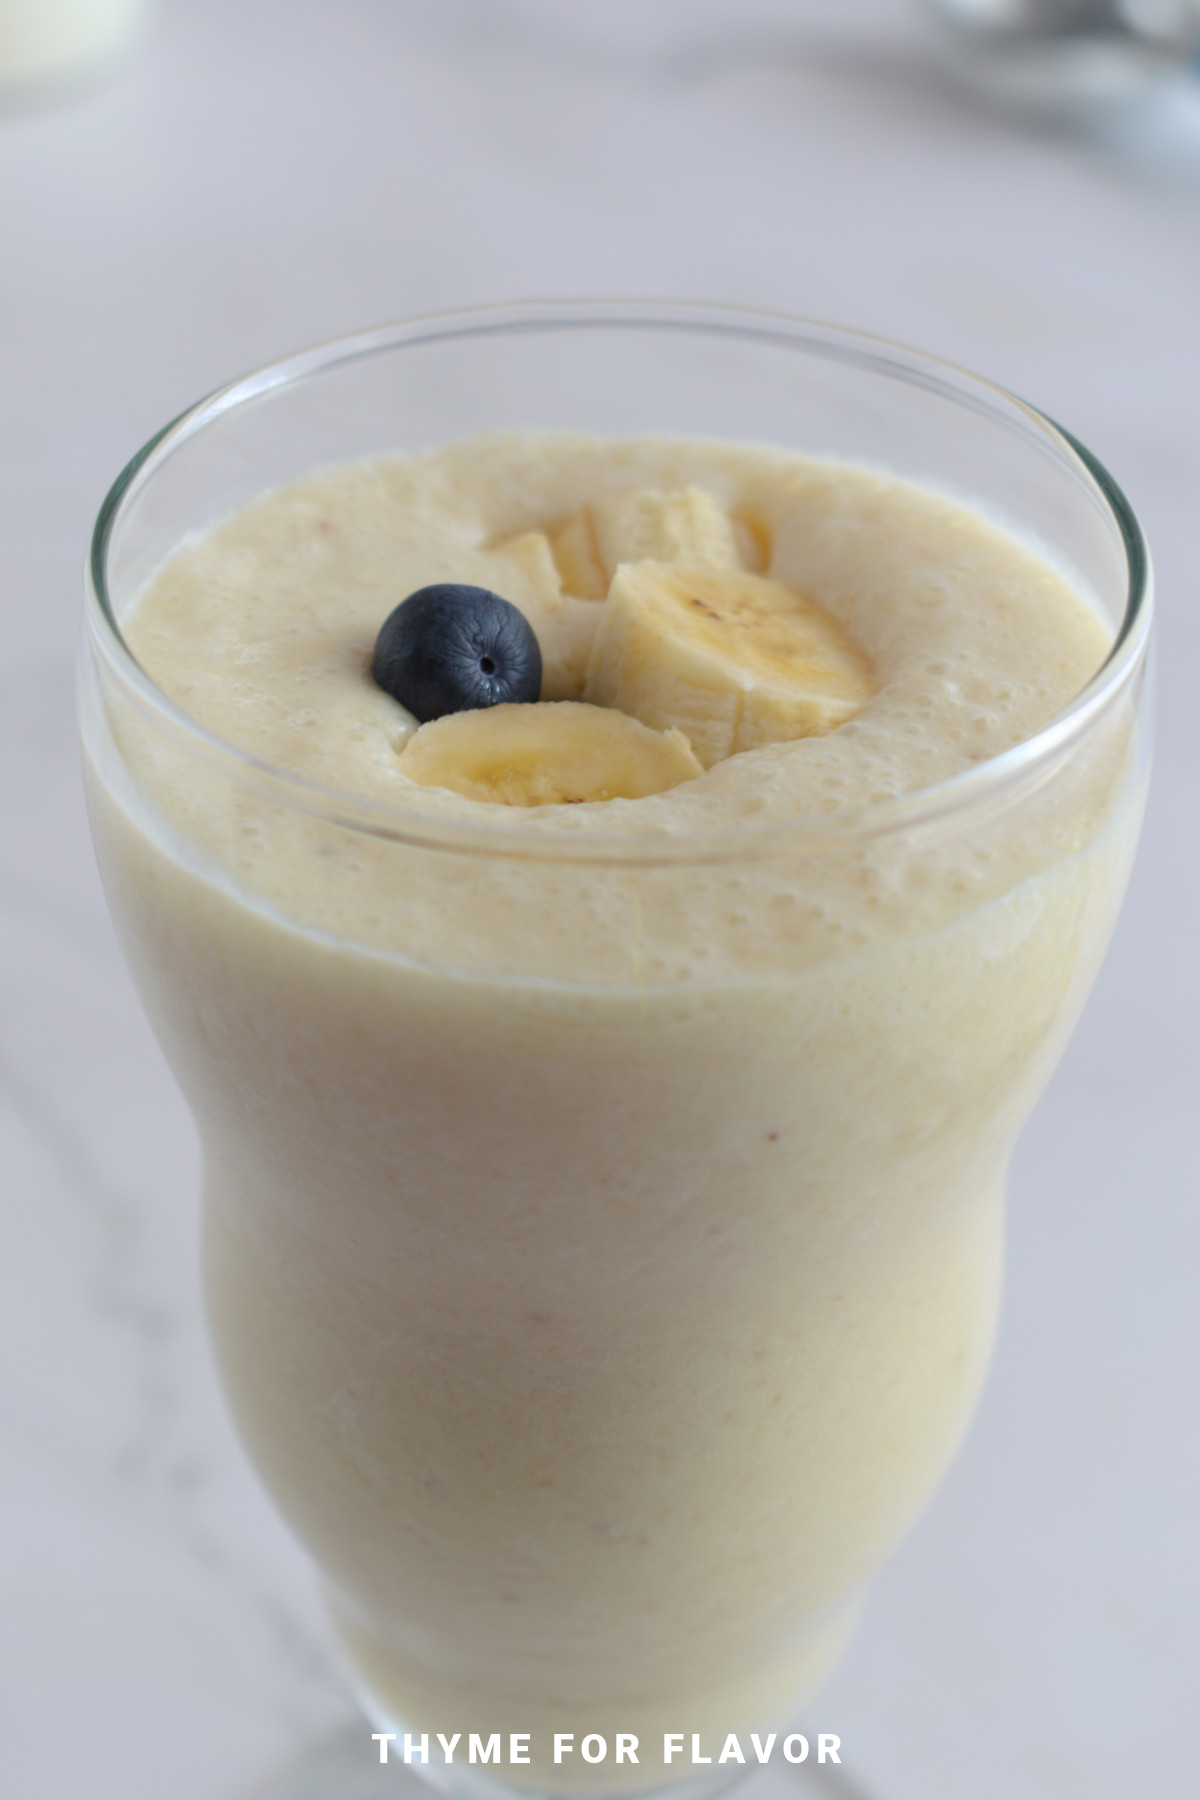 Banana milkshake in a tall glass, with sliced bananas and a blueberry.